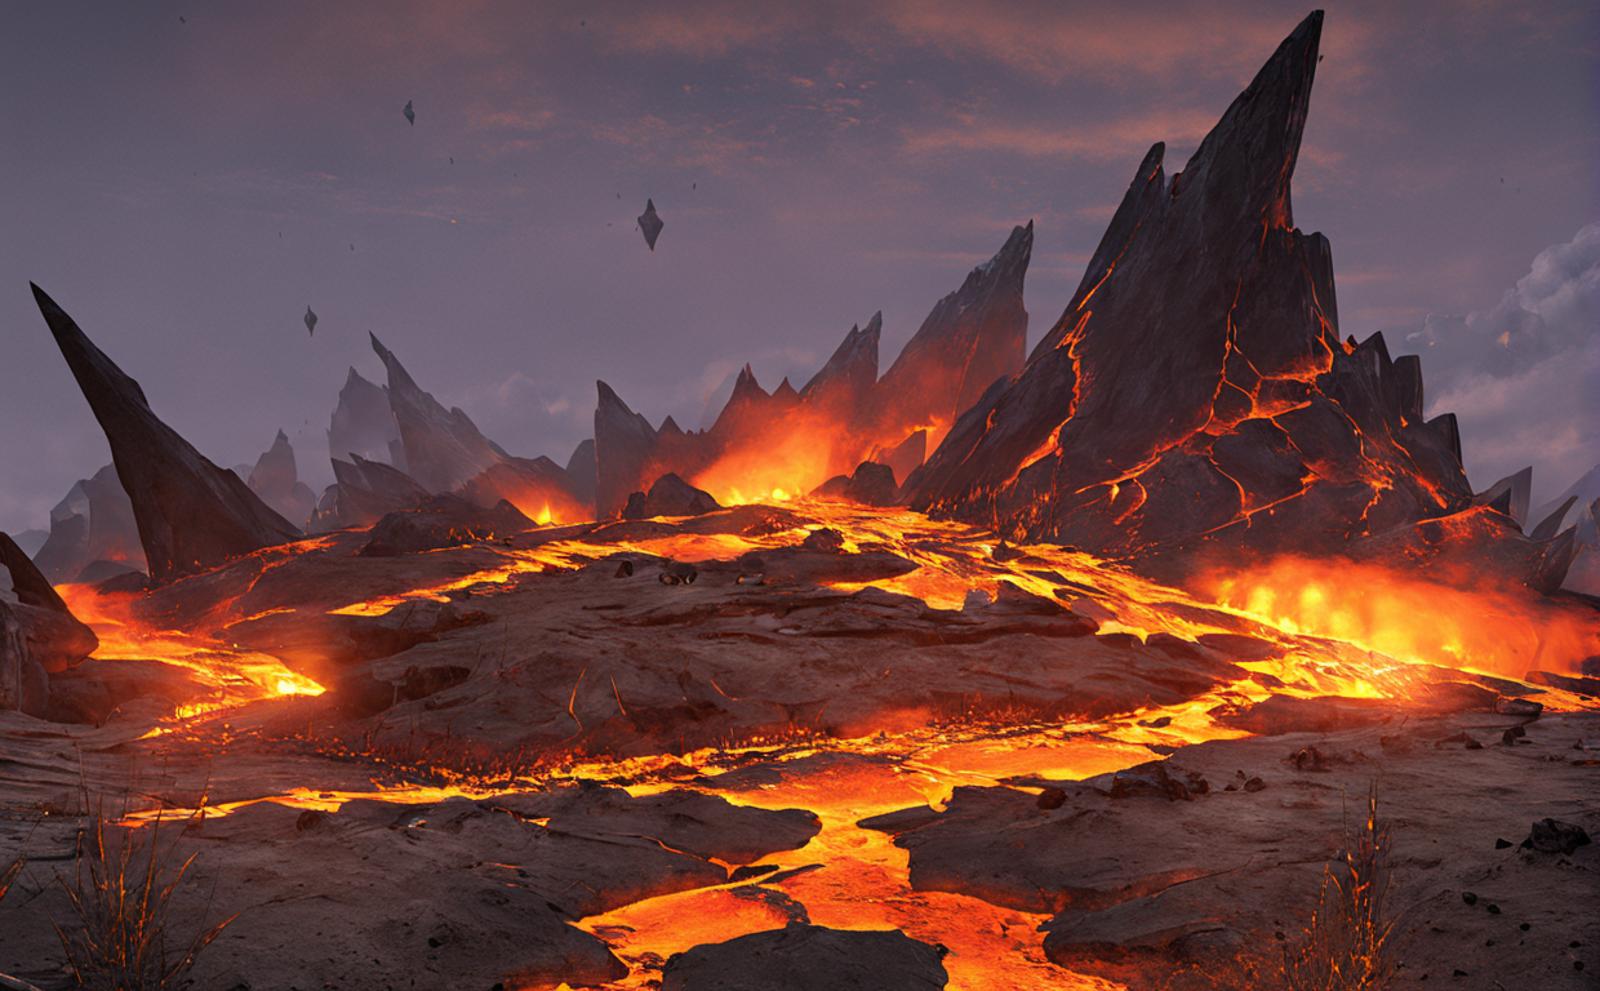 XL 熔岩之地（Lava Lands） image by MysteriousEasternpower